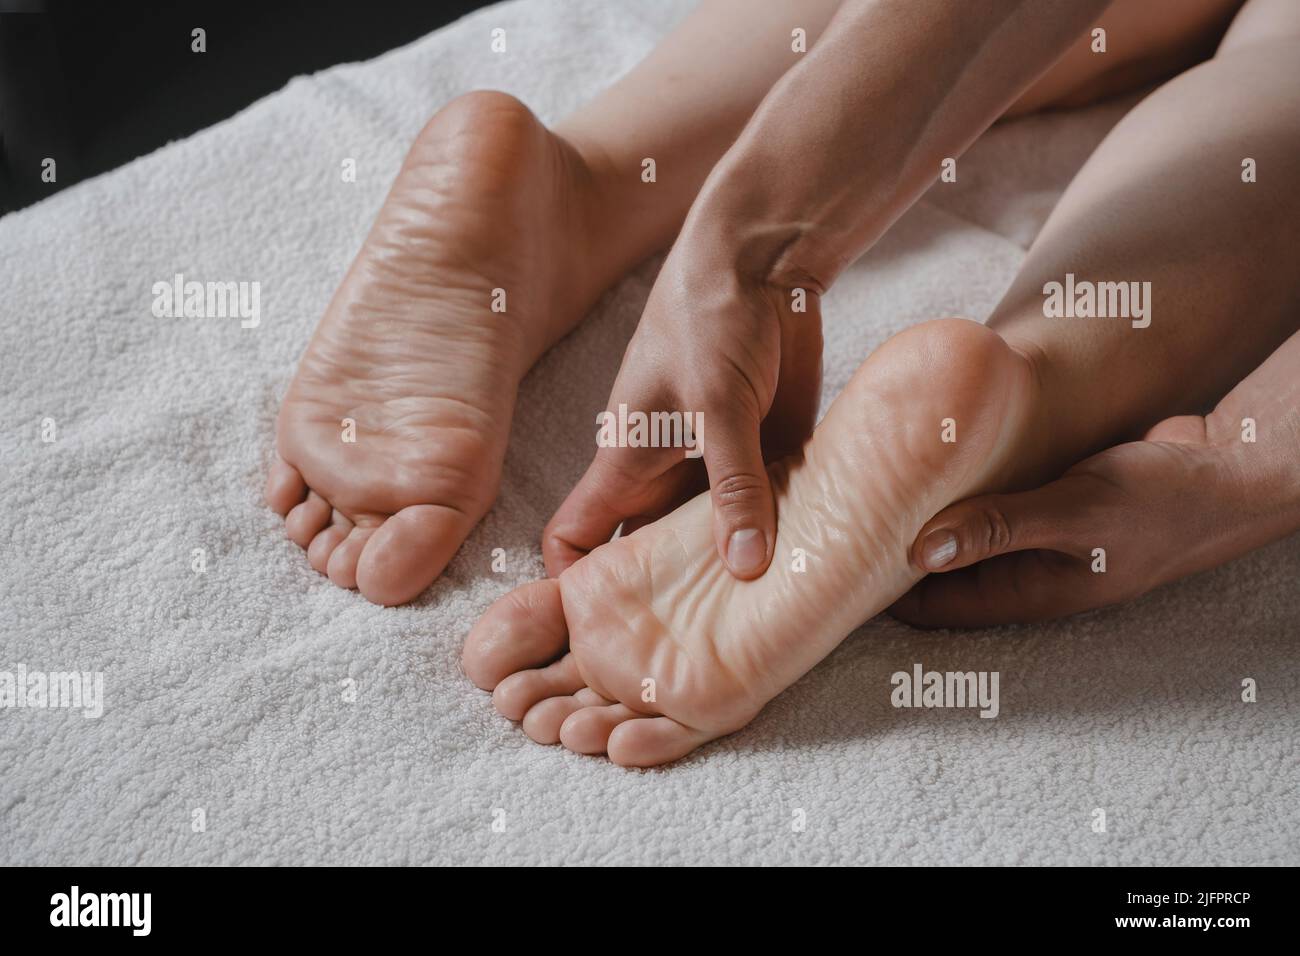 Woman Foot spa massage treatment by professional massage therapist in spa resort. Wellness, stress relief and rejuvenation concept. Body care Stock Photo